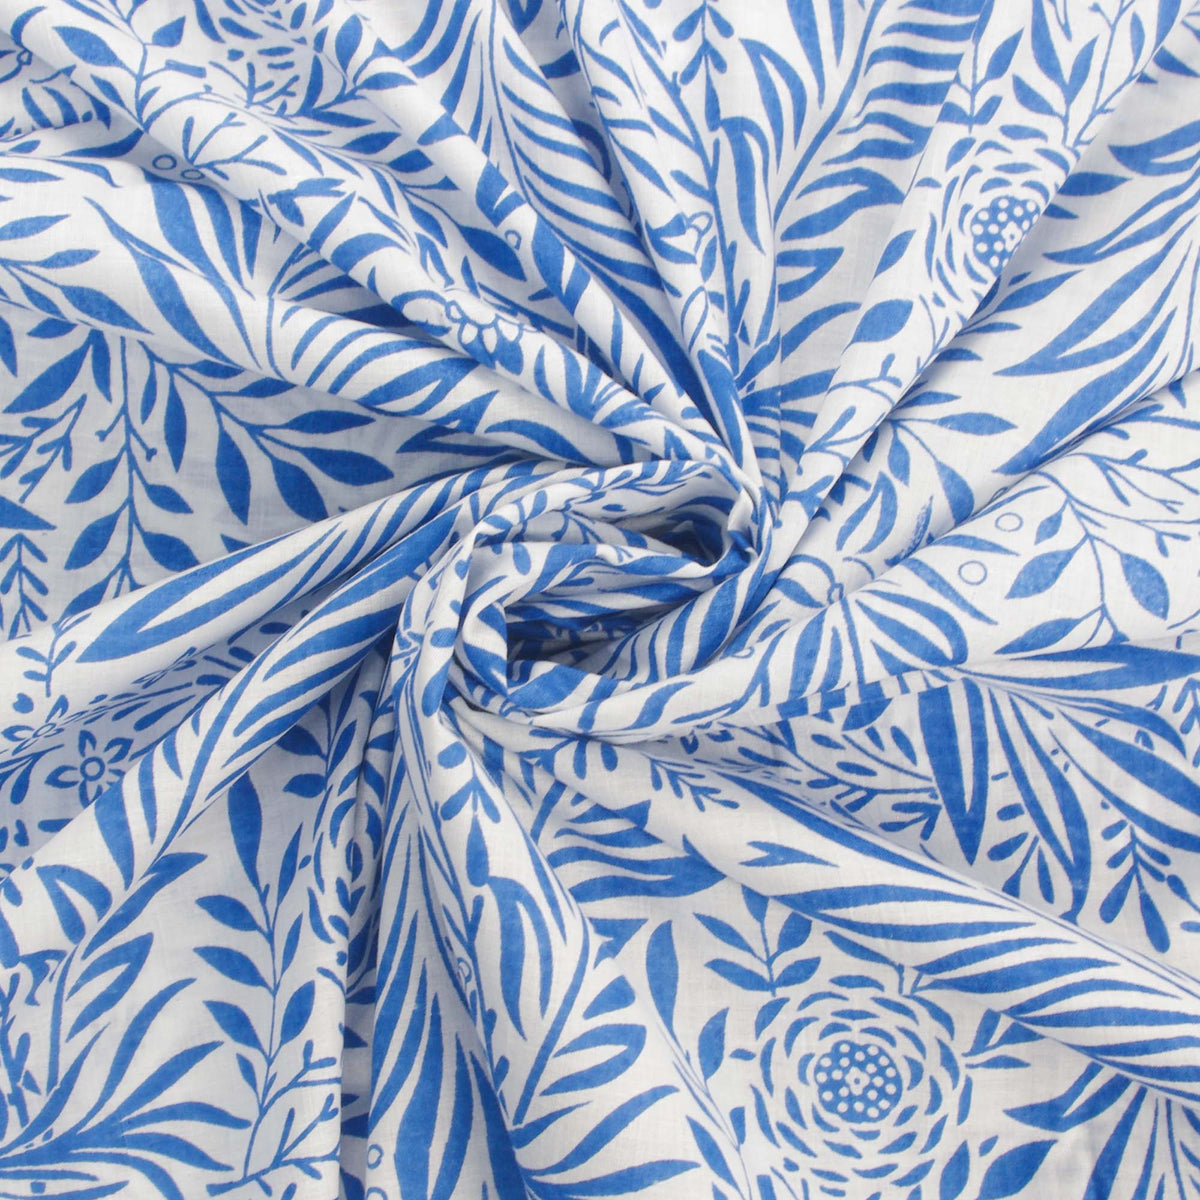 White & Blue Floral Hand Block Printed Cotton Fabric Design 453